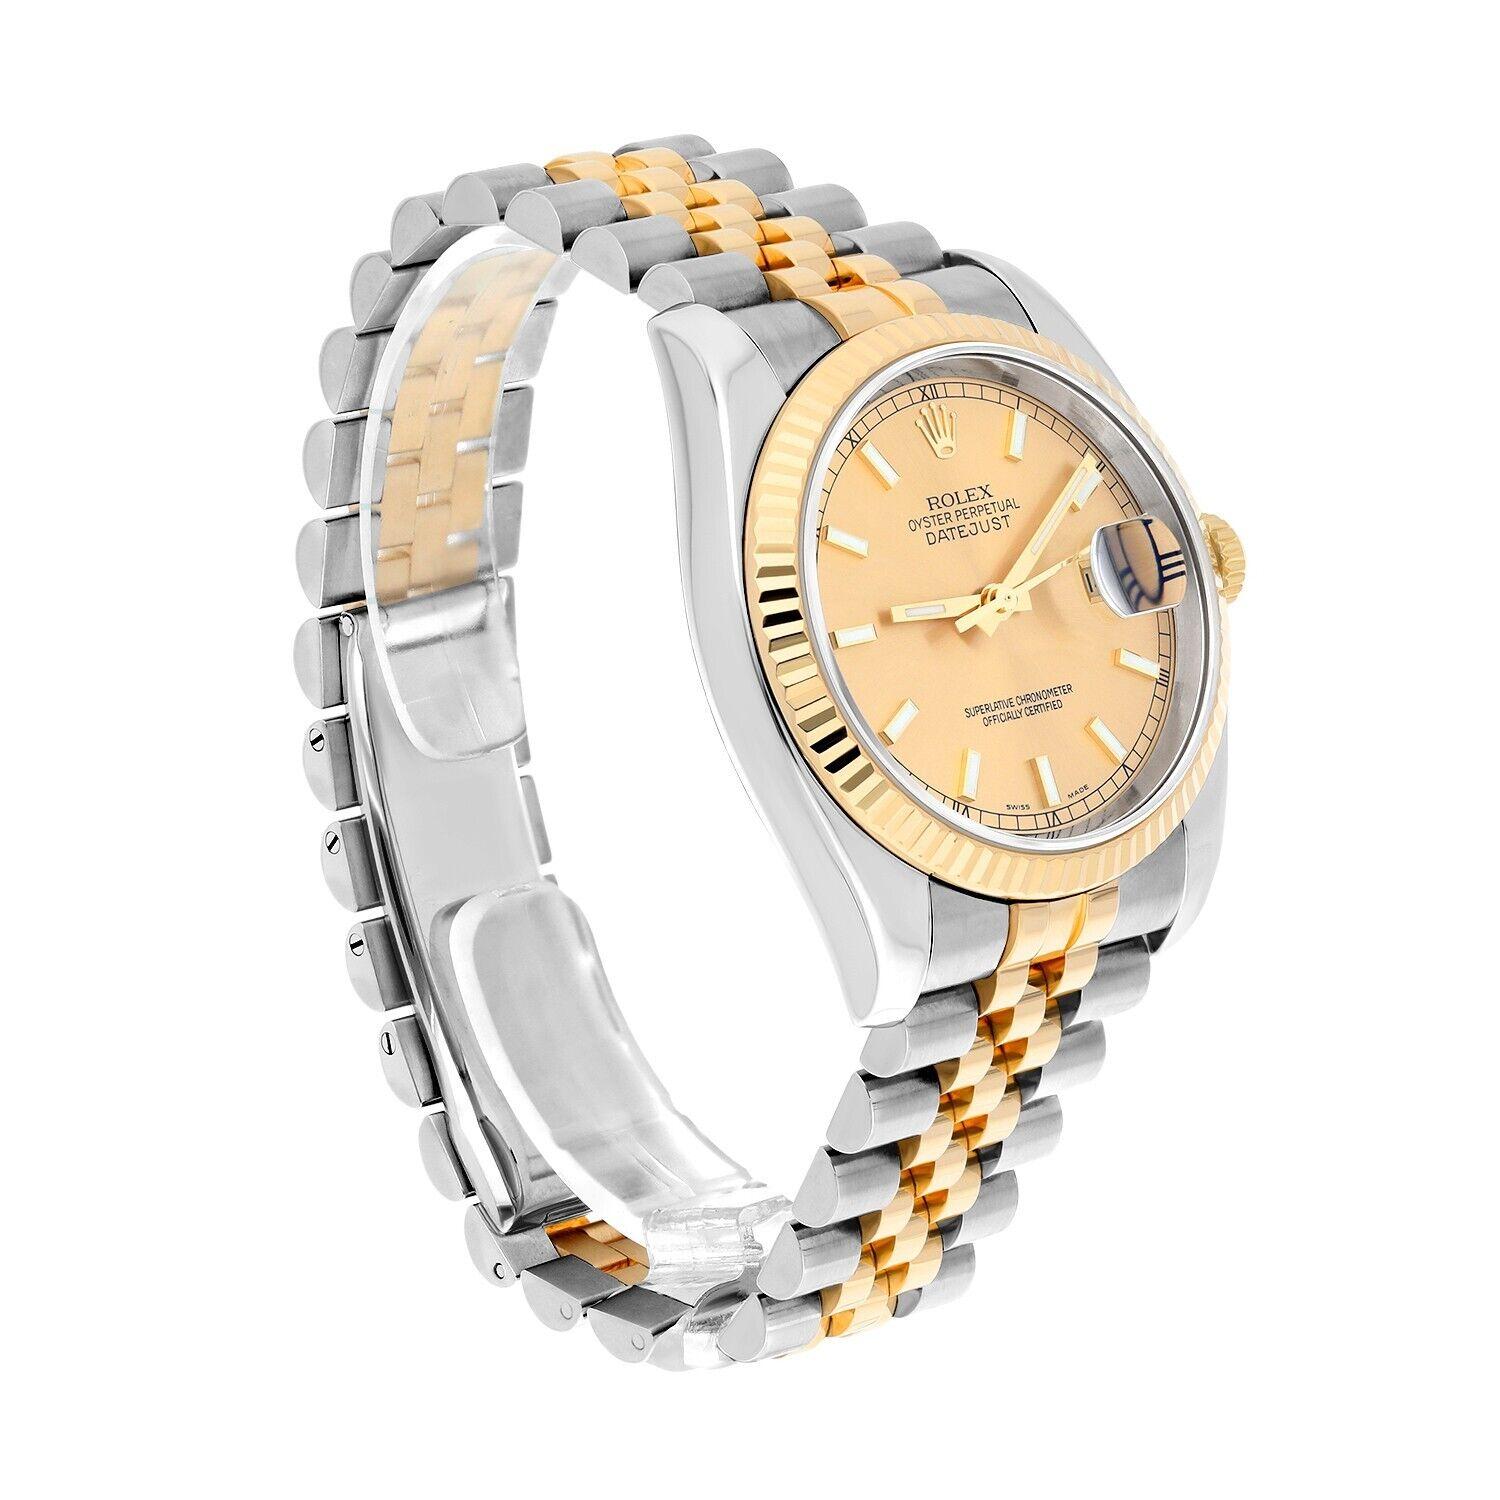 Rolex Datejust 36 Gold & Steel 116233 Watch Champagne Index Dial Jubilee Watch For Sale 1